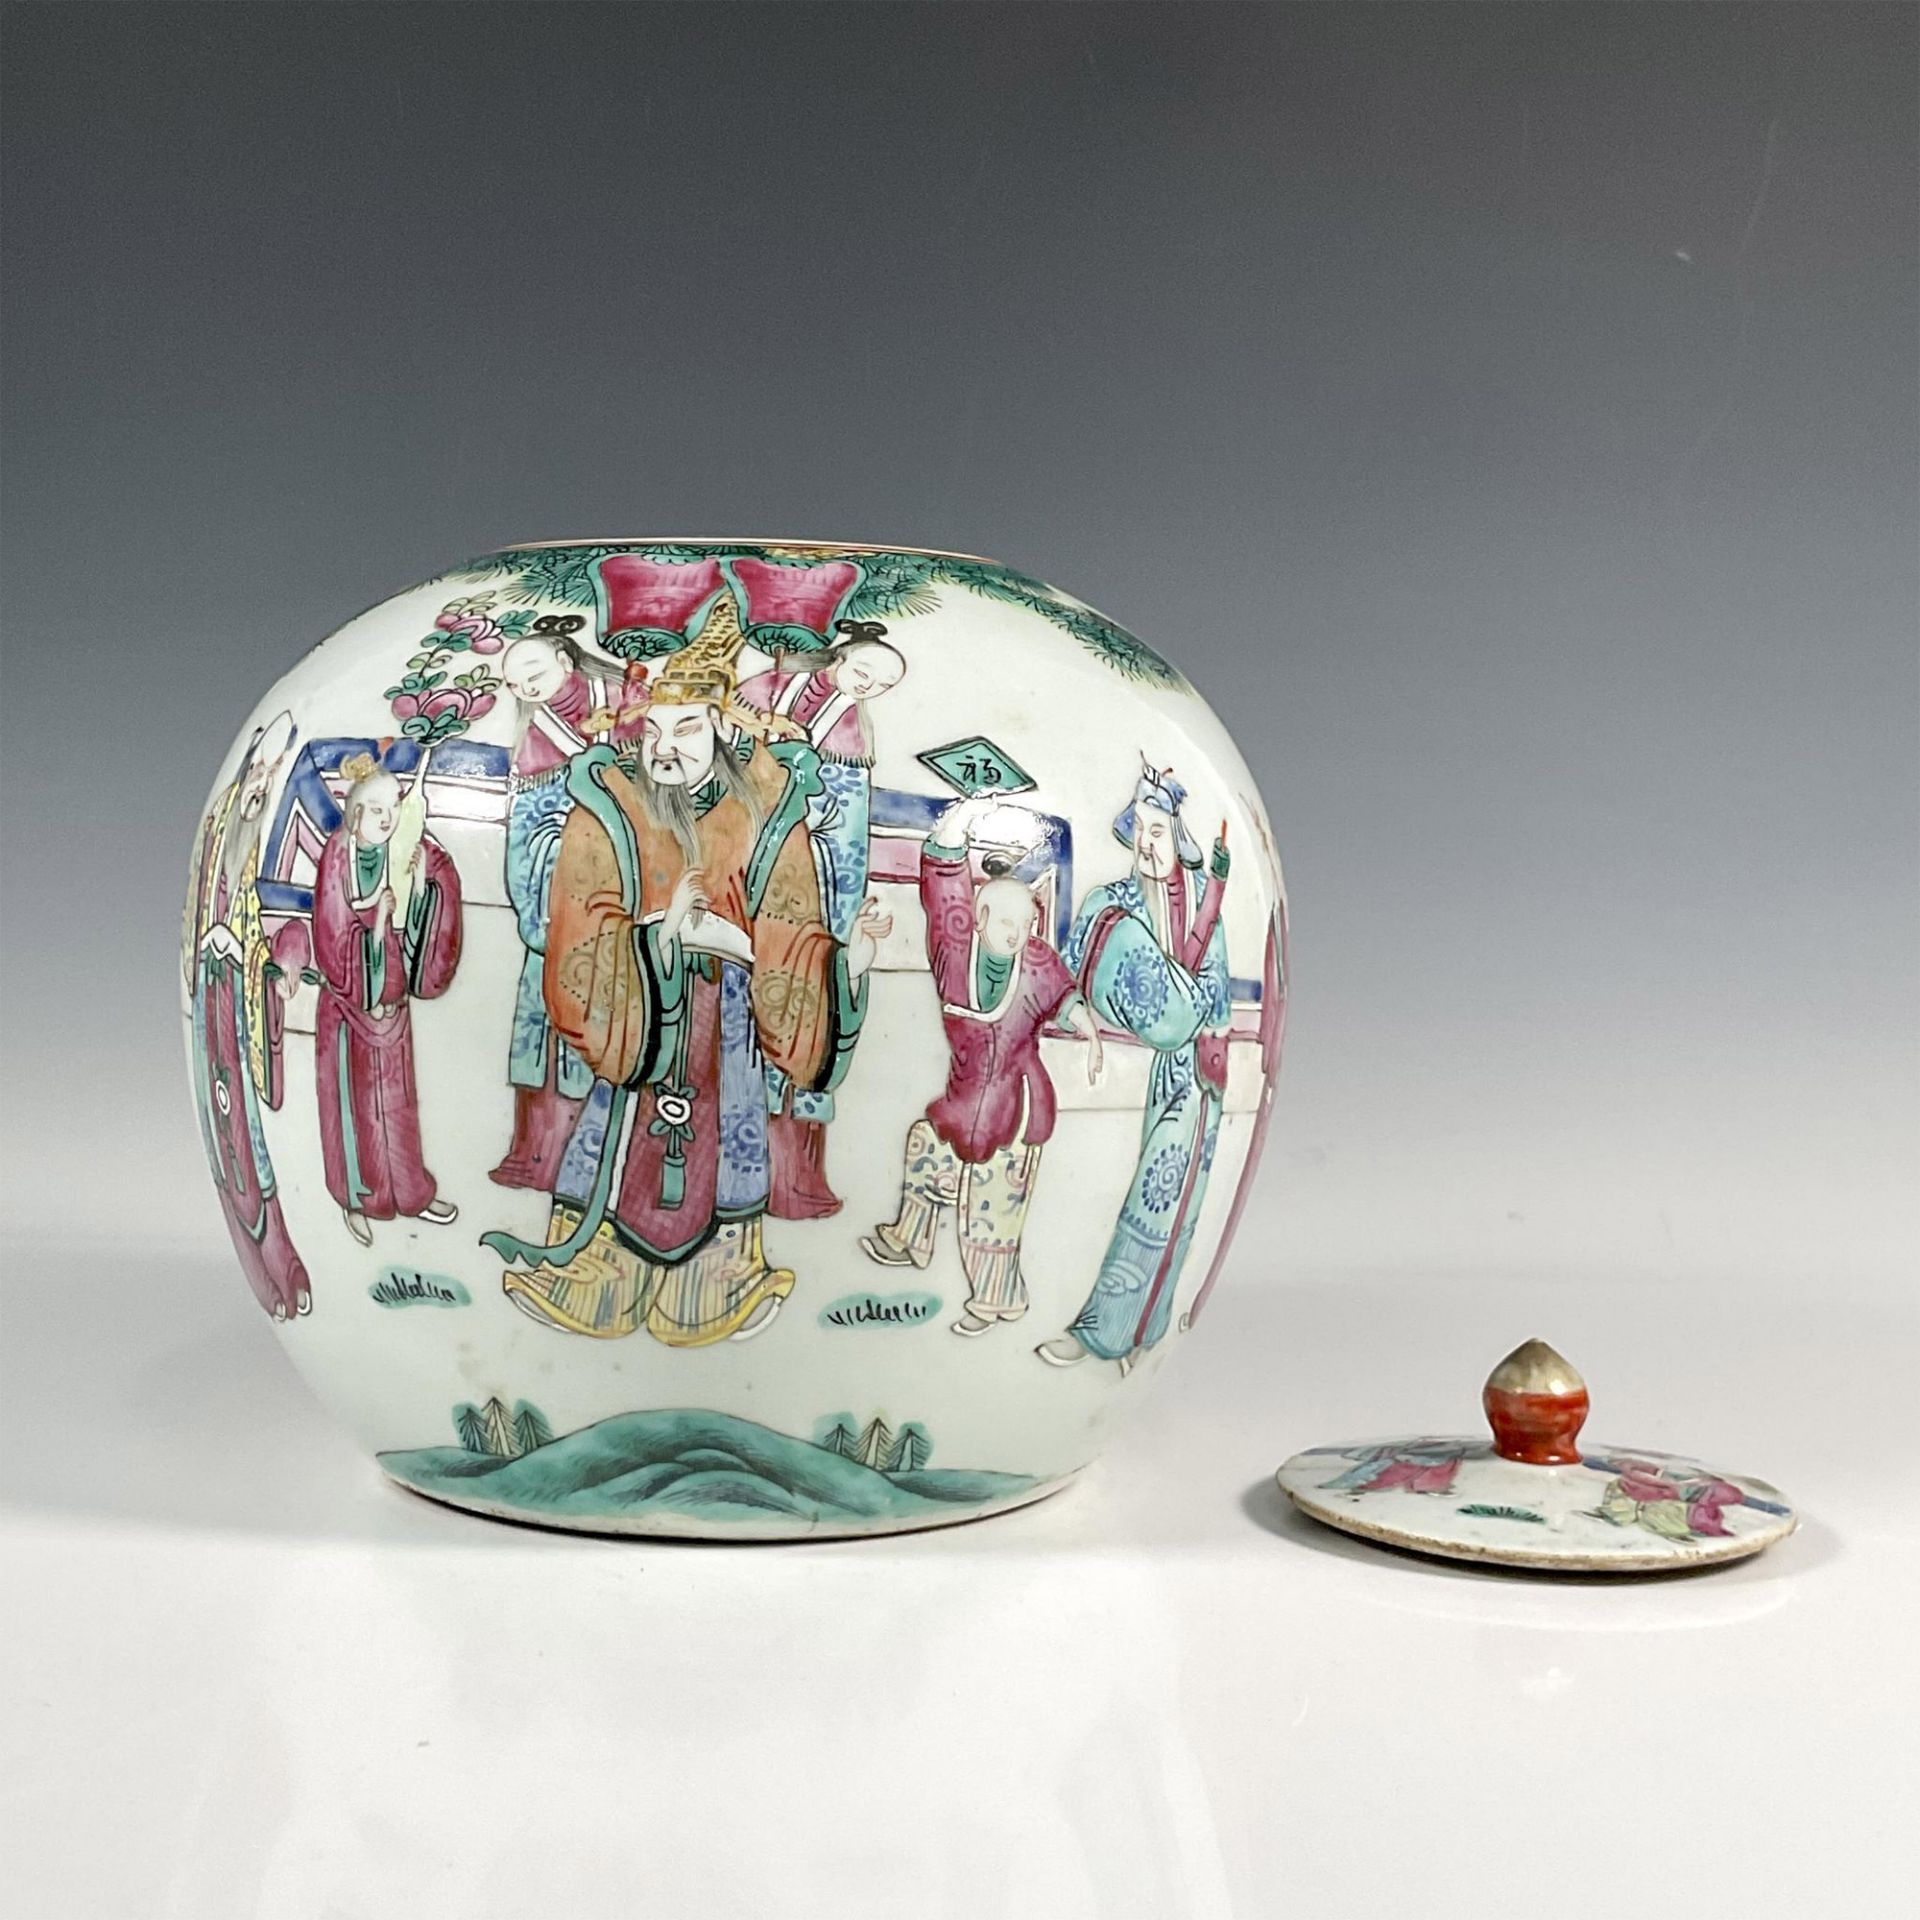 Chinese Qing Dynasty Porcelain Covered Ginger Pot - Image 2 of 5